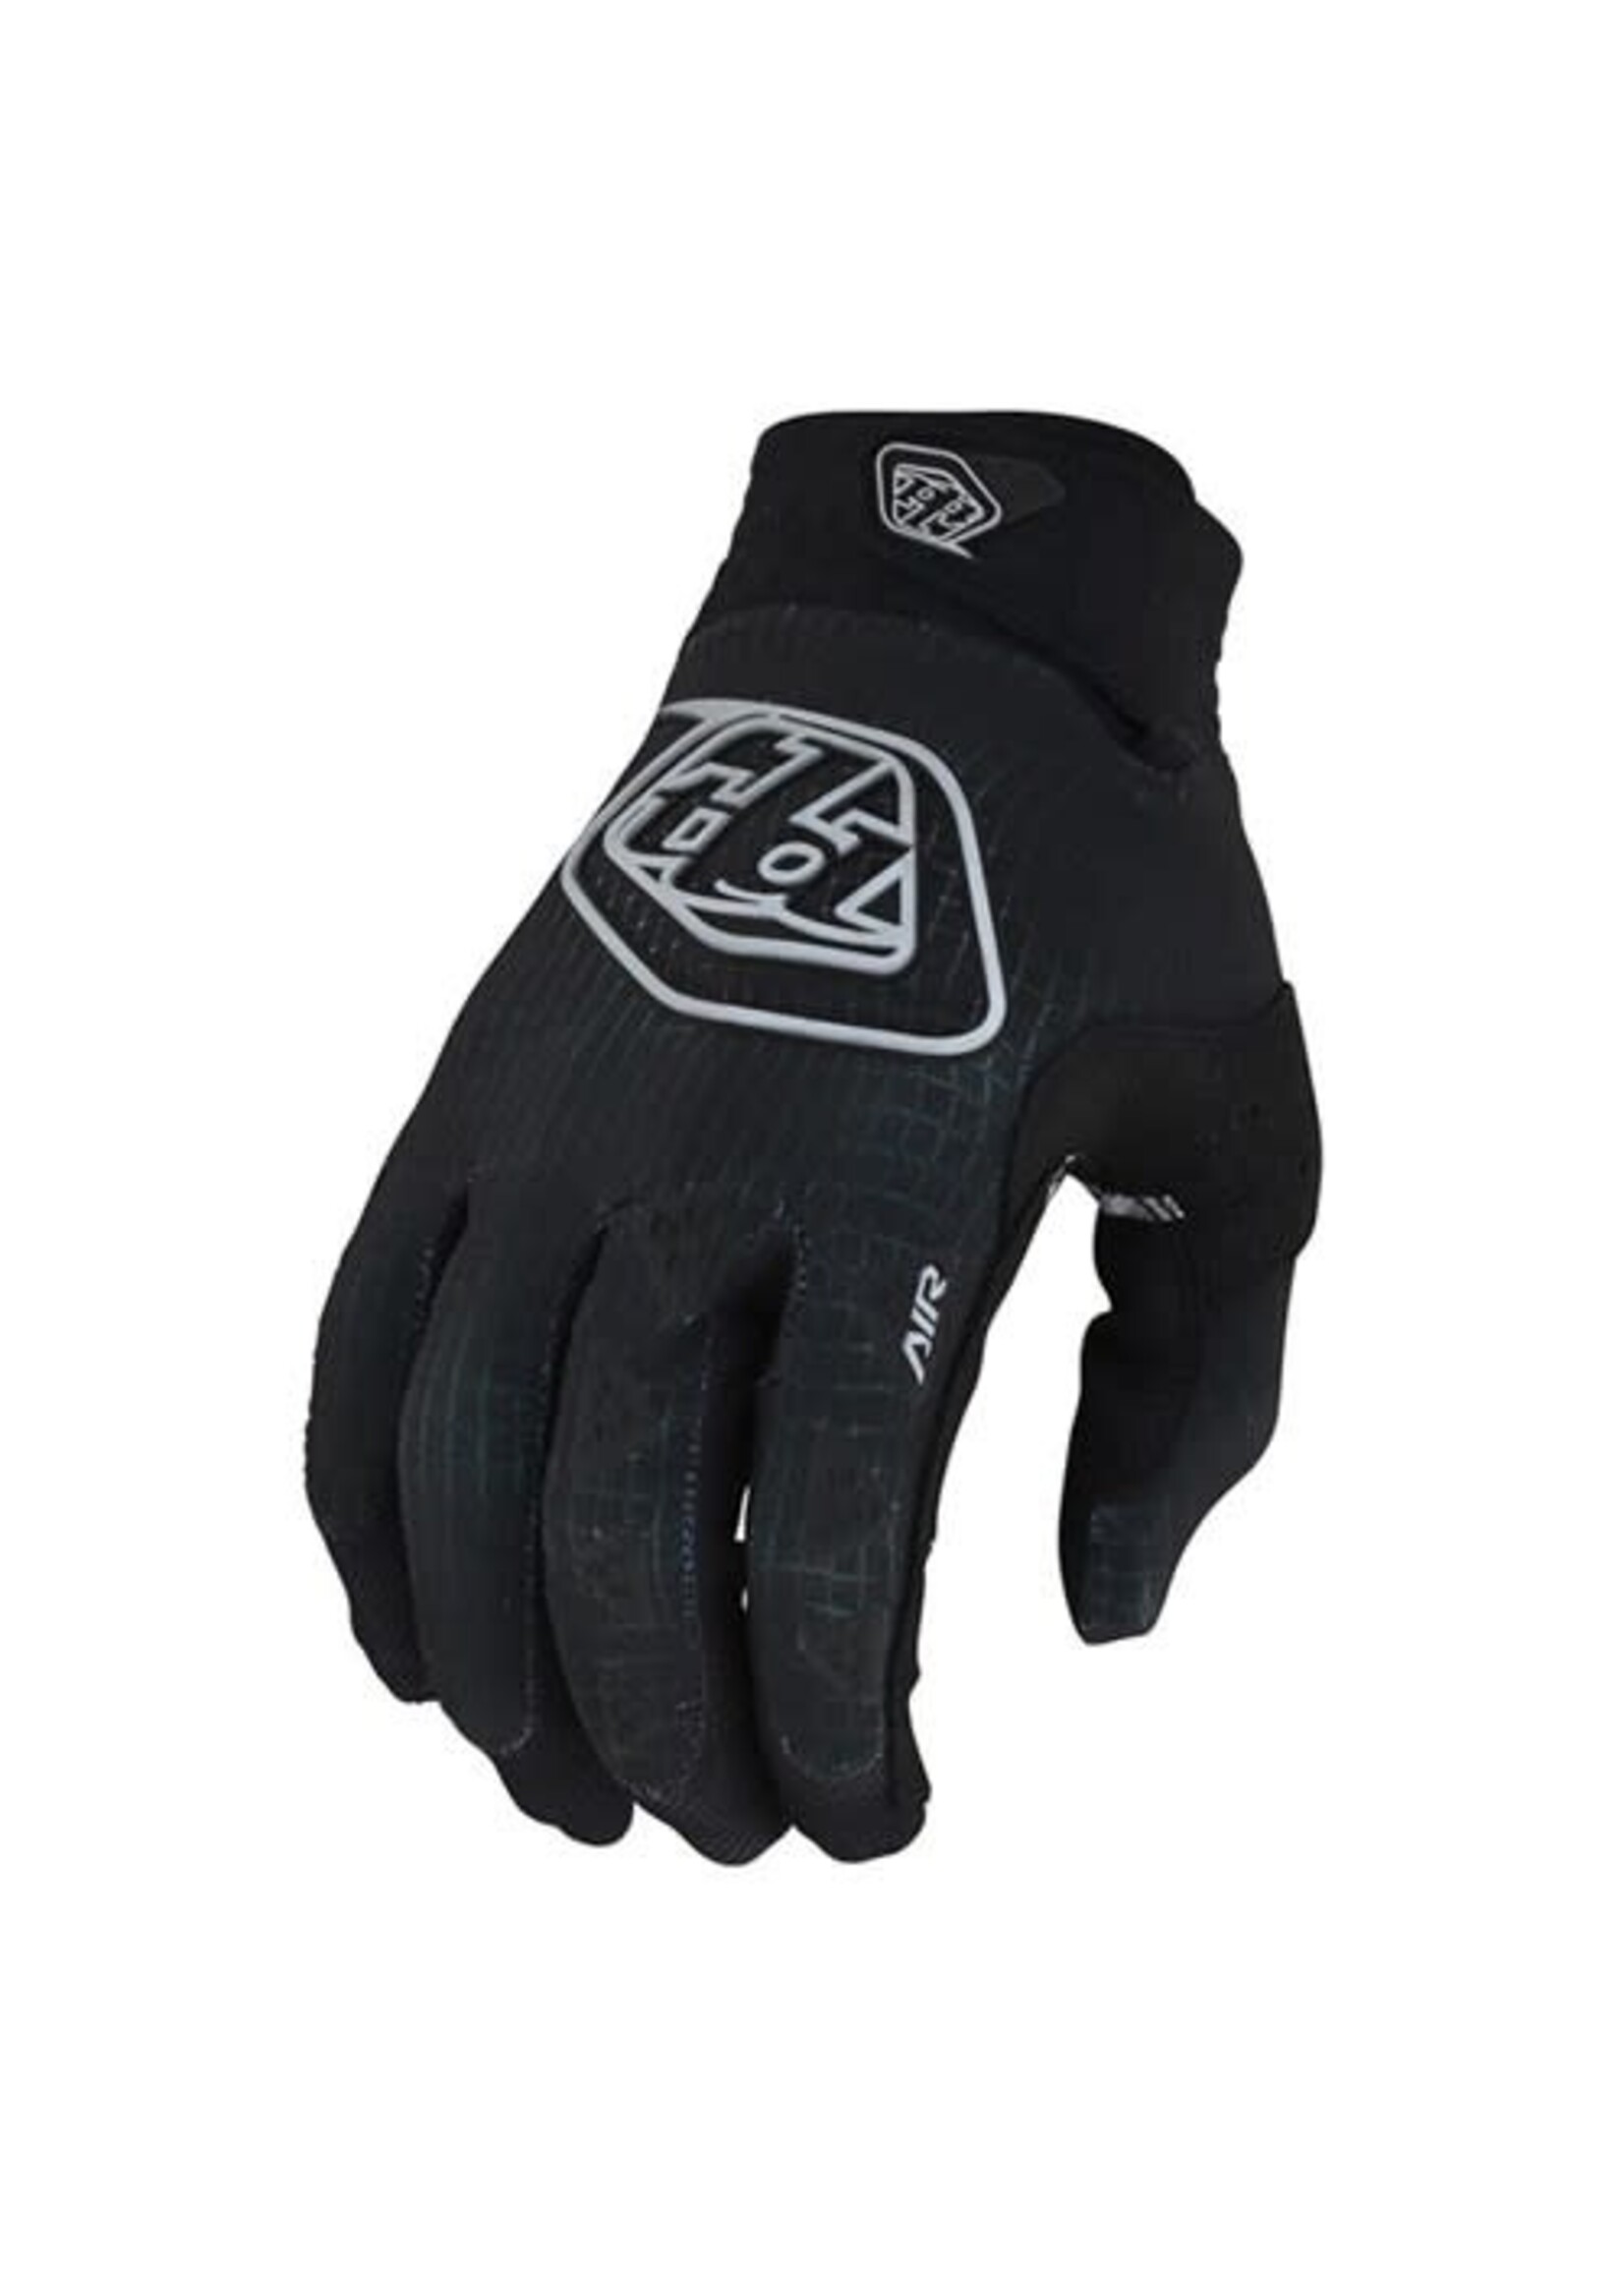 Troylee Designs Glove TLD 24.1 Air Youth